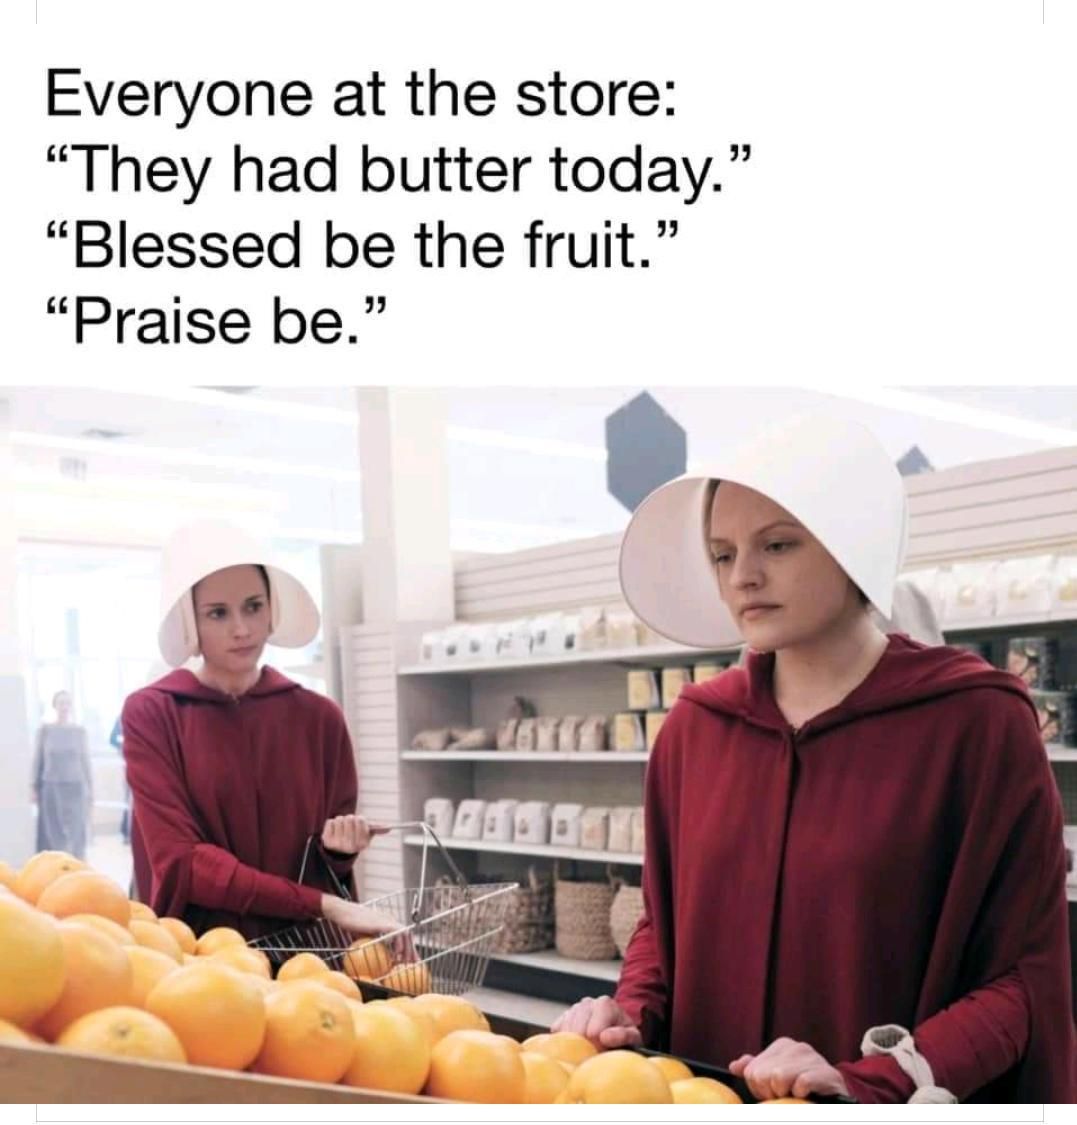 “Blessed be”